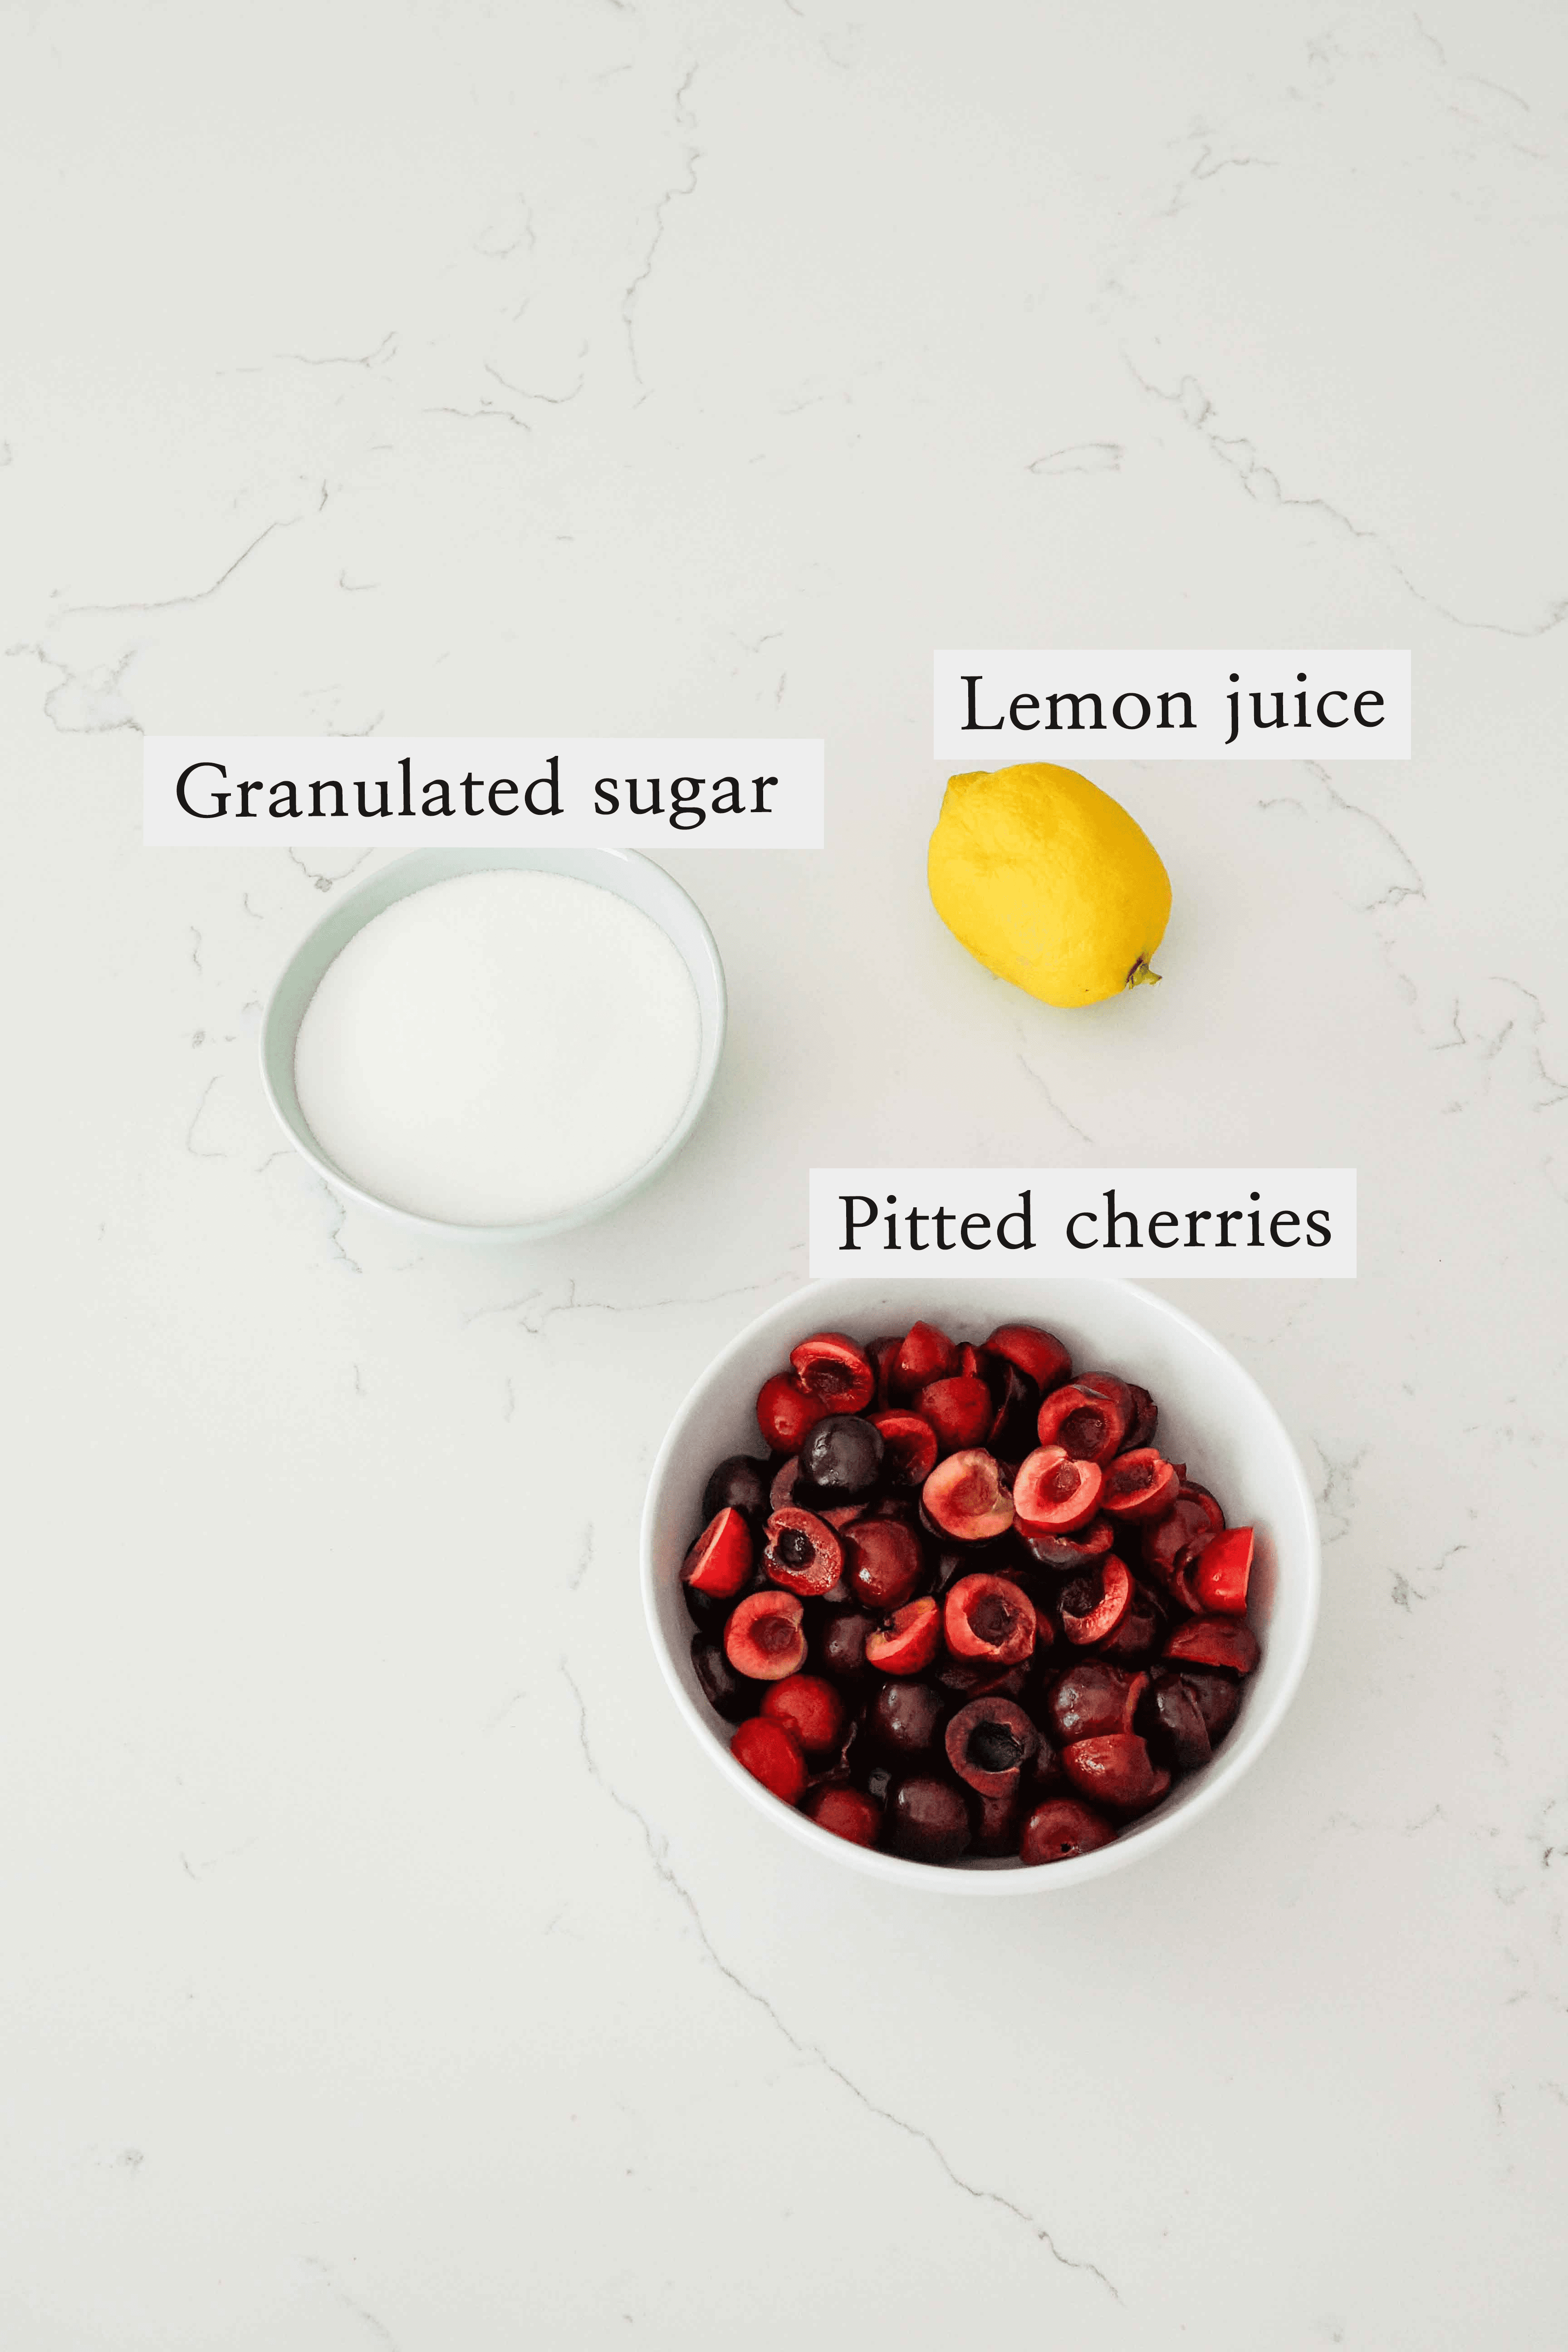 A bowl of halved cherries, a lemon, and a bowl of sugar on a white quartz counter.